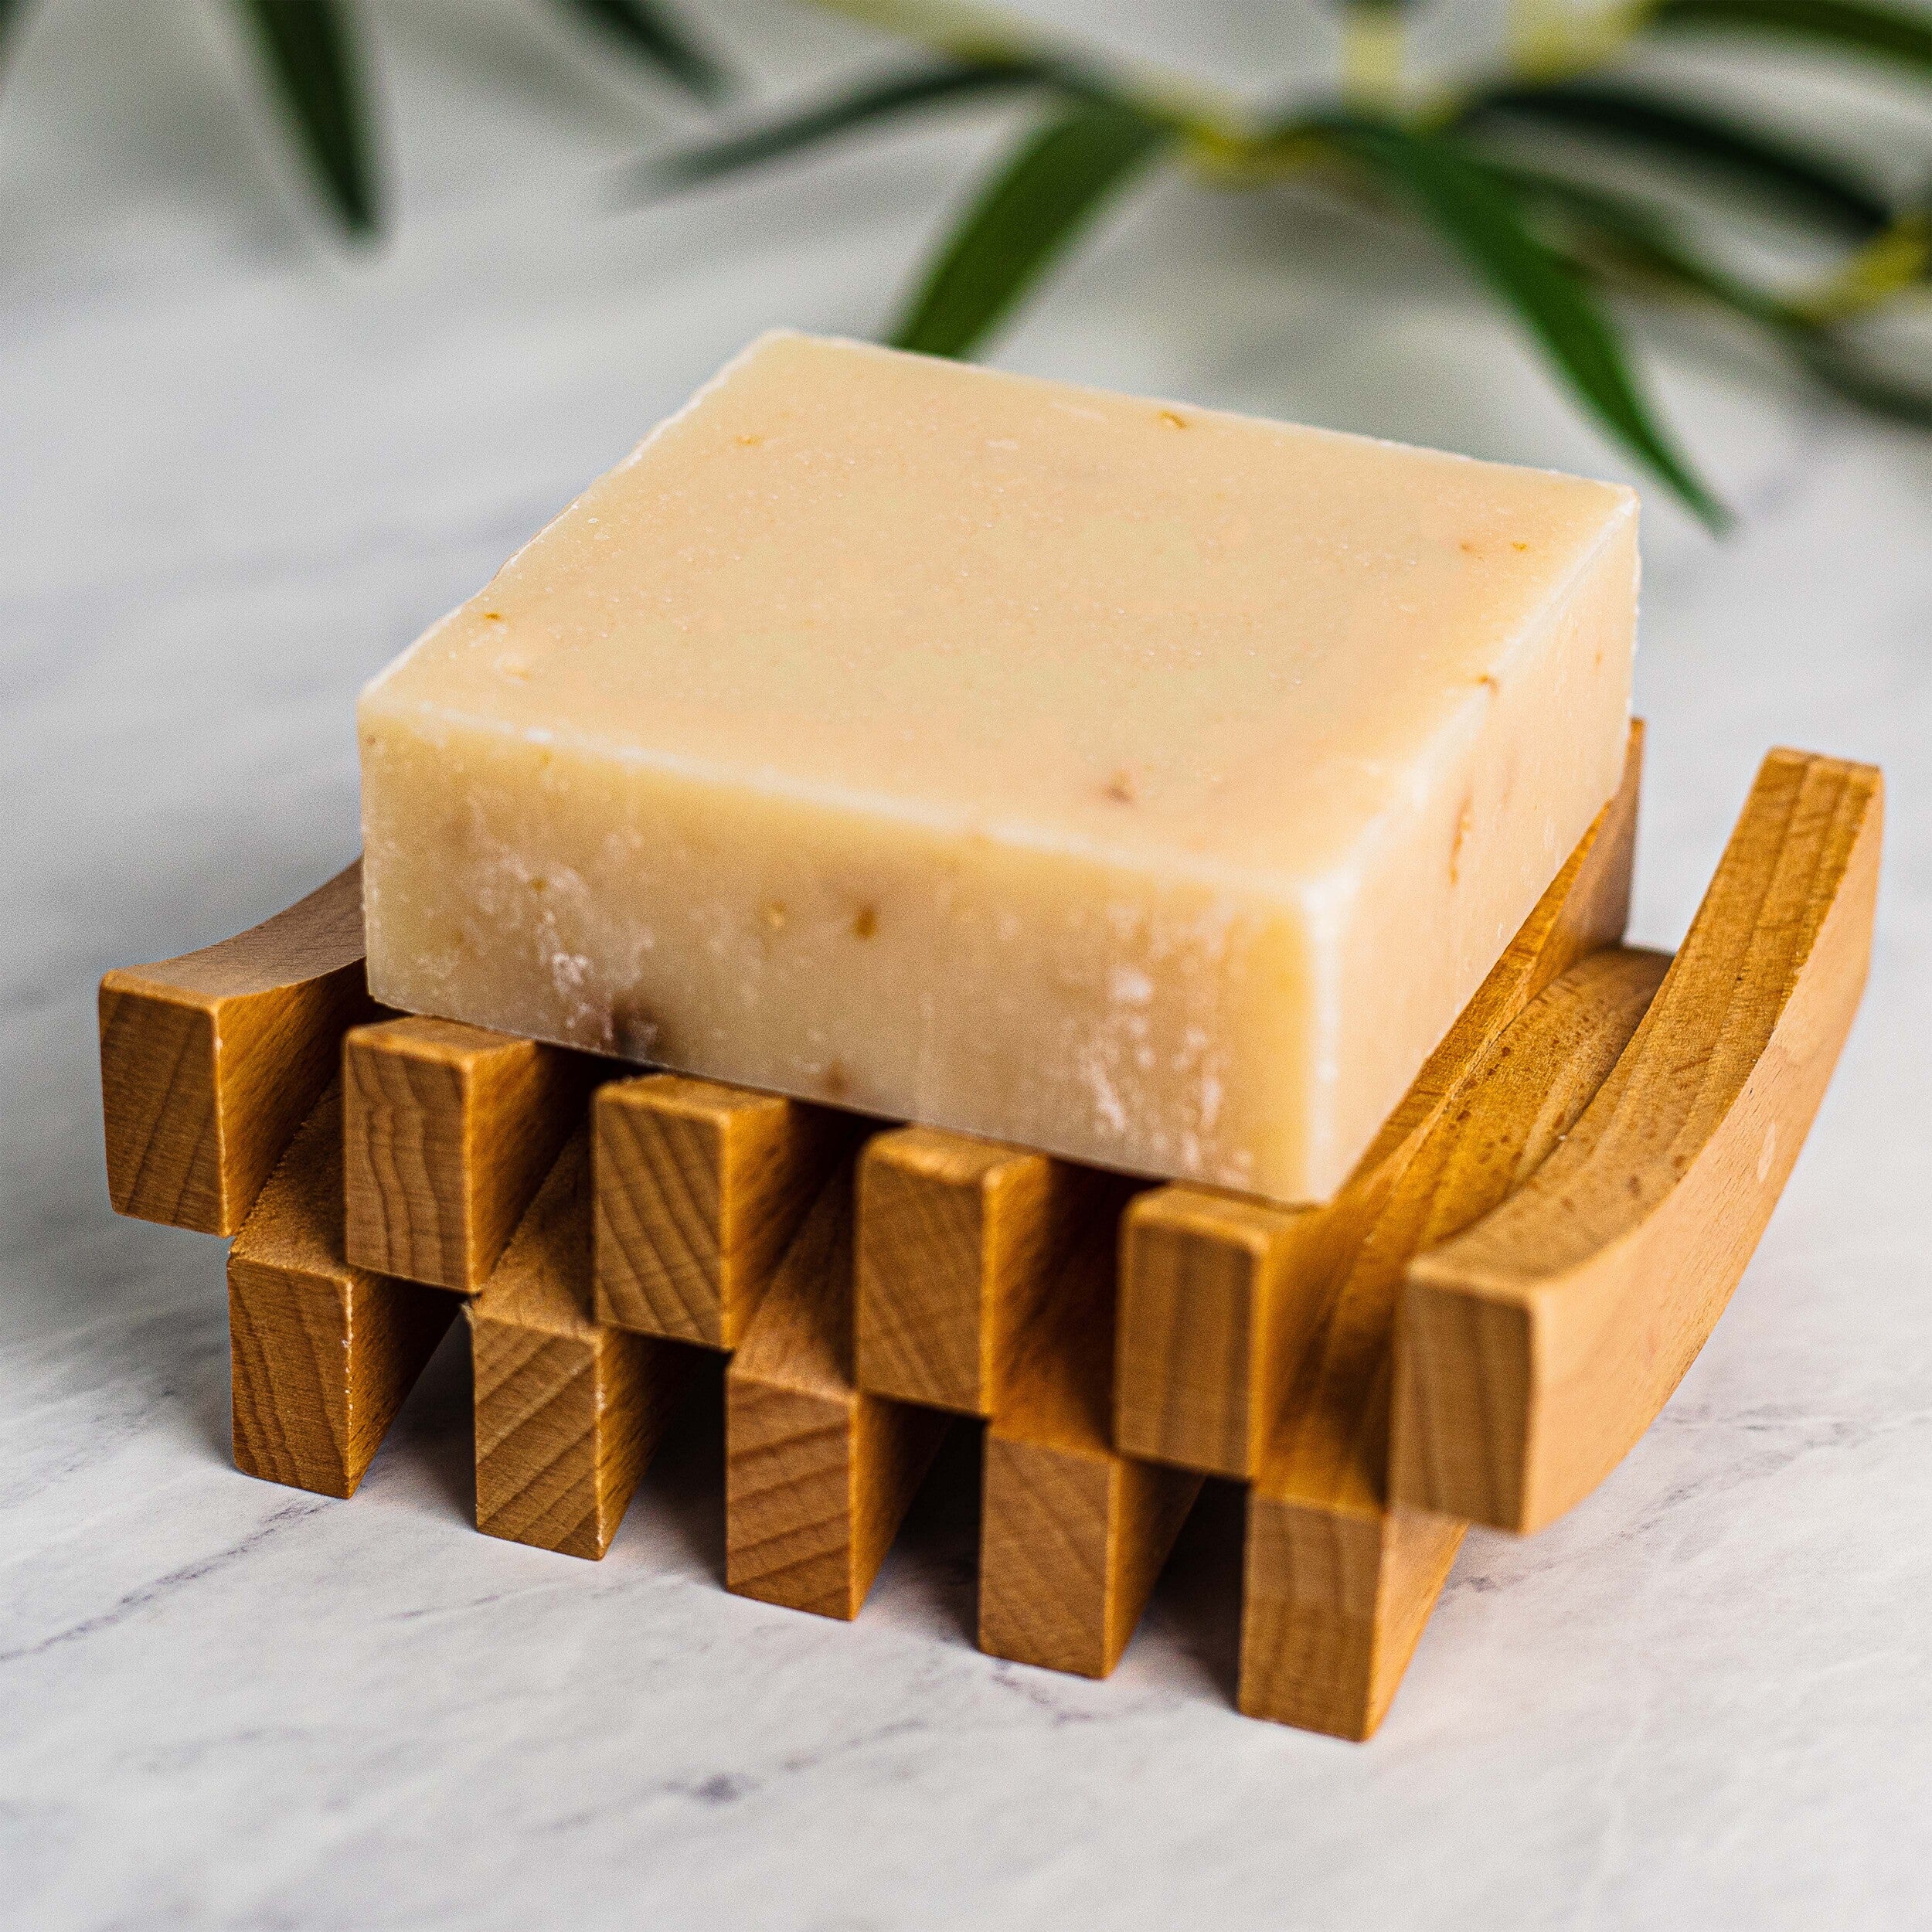 Oatmeal Soaps: Benefits of Oatmeal, Various Oils, And Honey In Soap-Making